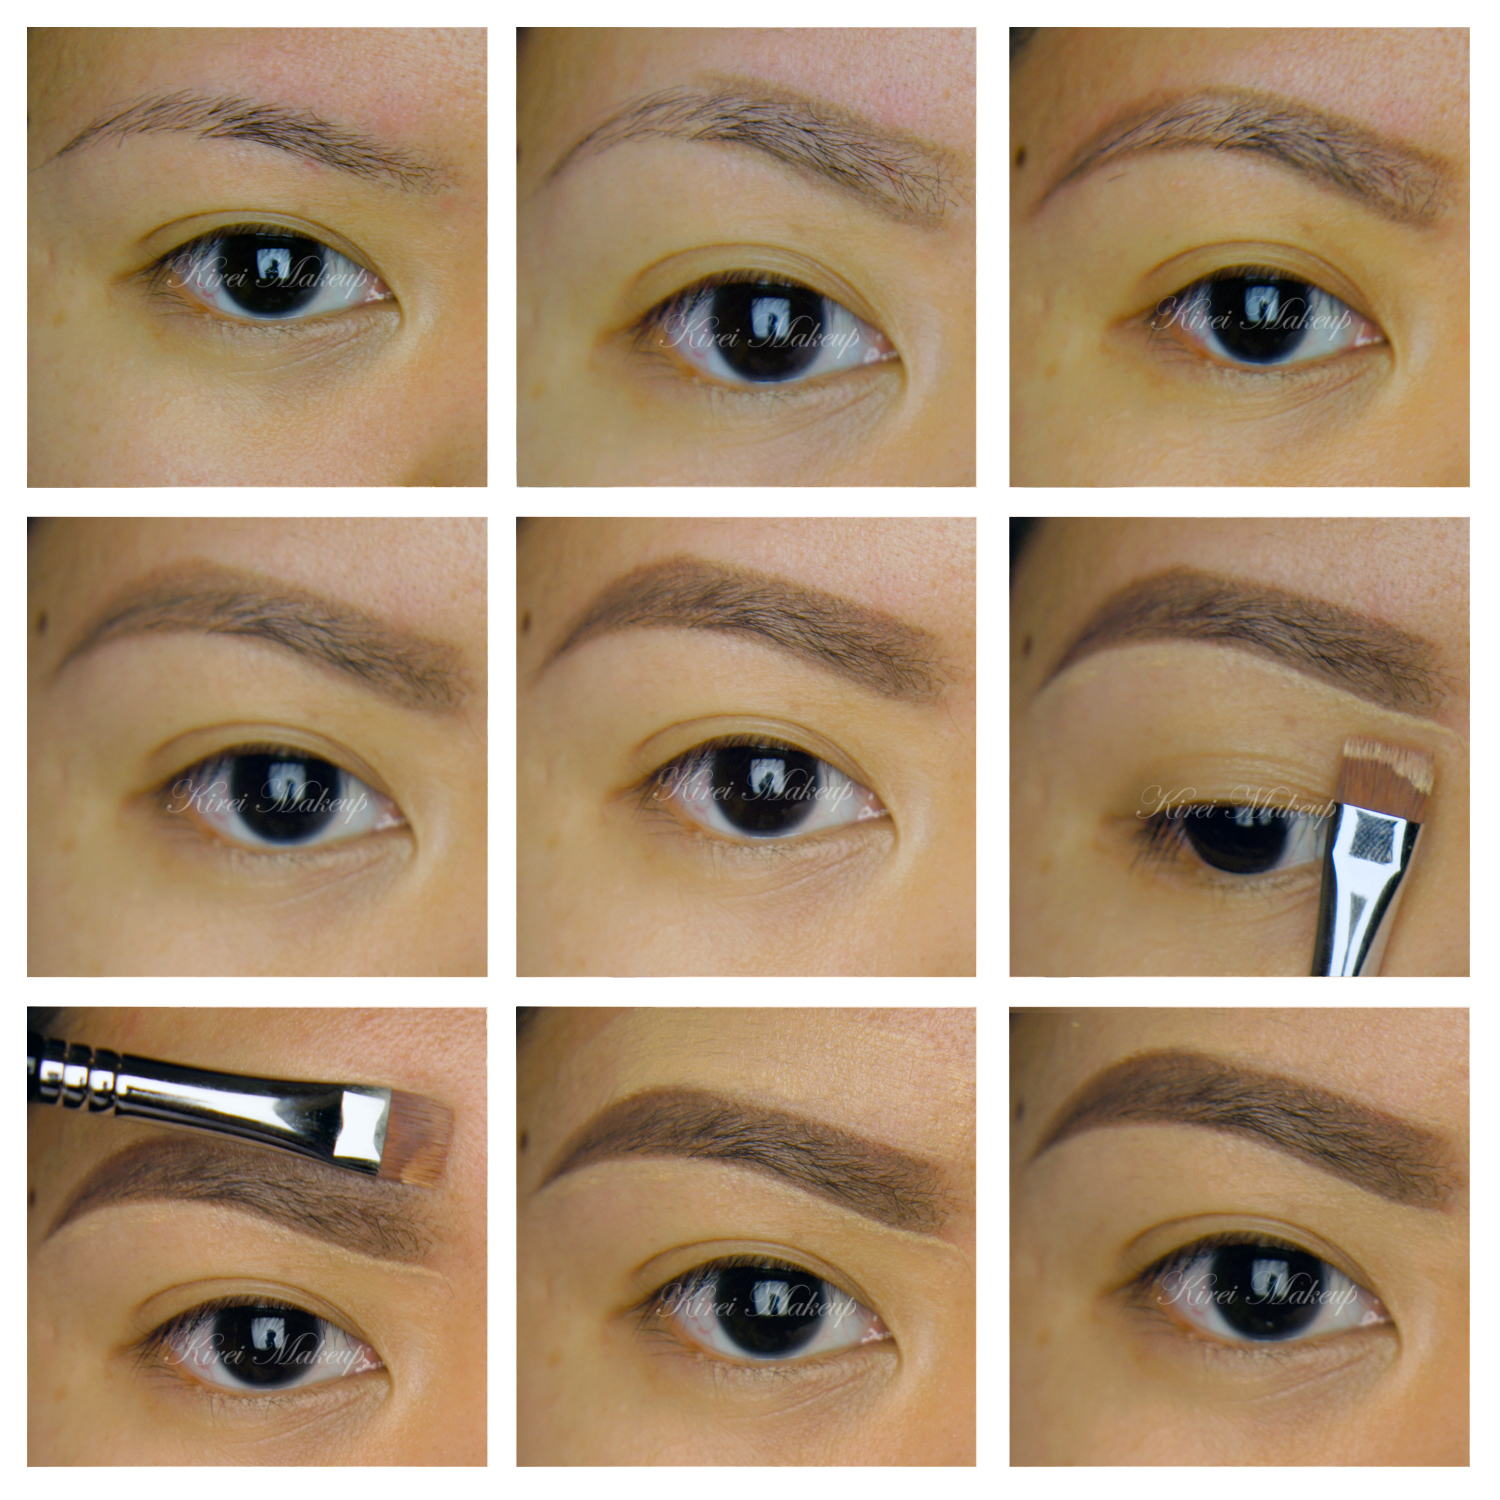 How To Fill In Eyebrows Kirei Makeup